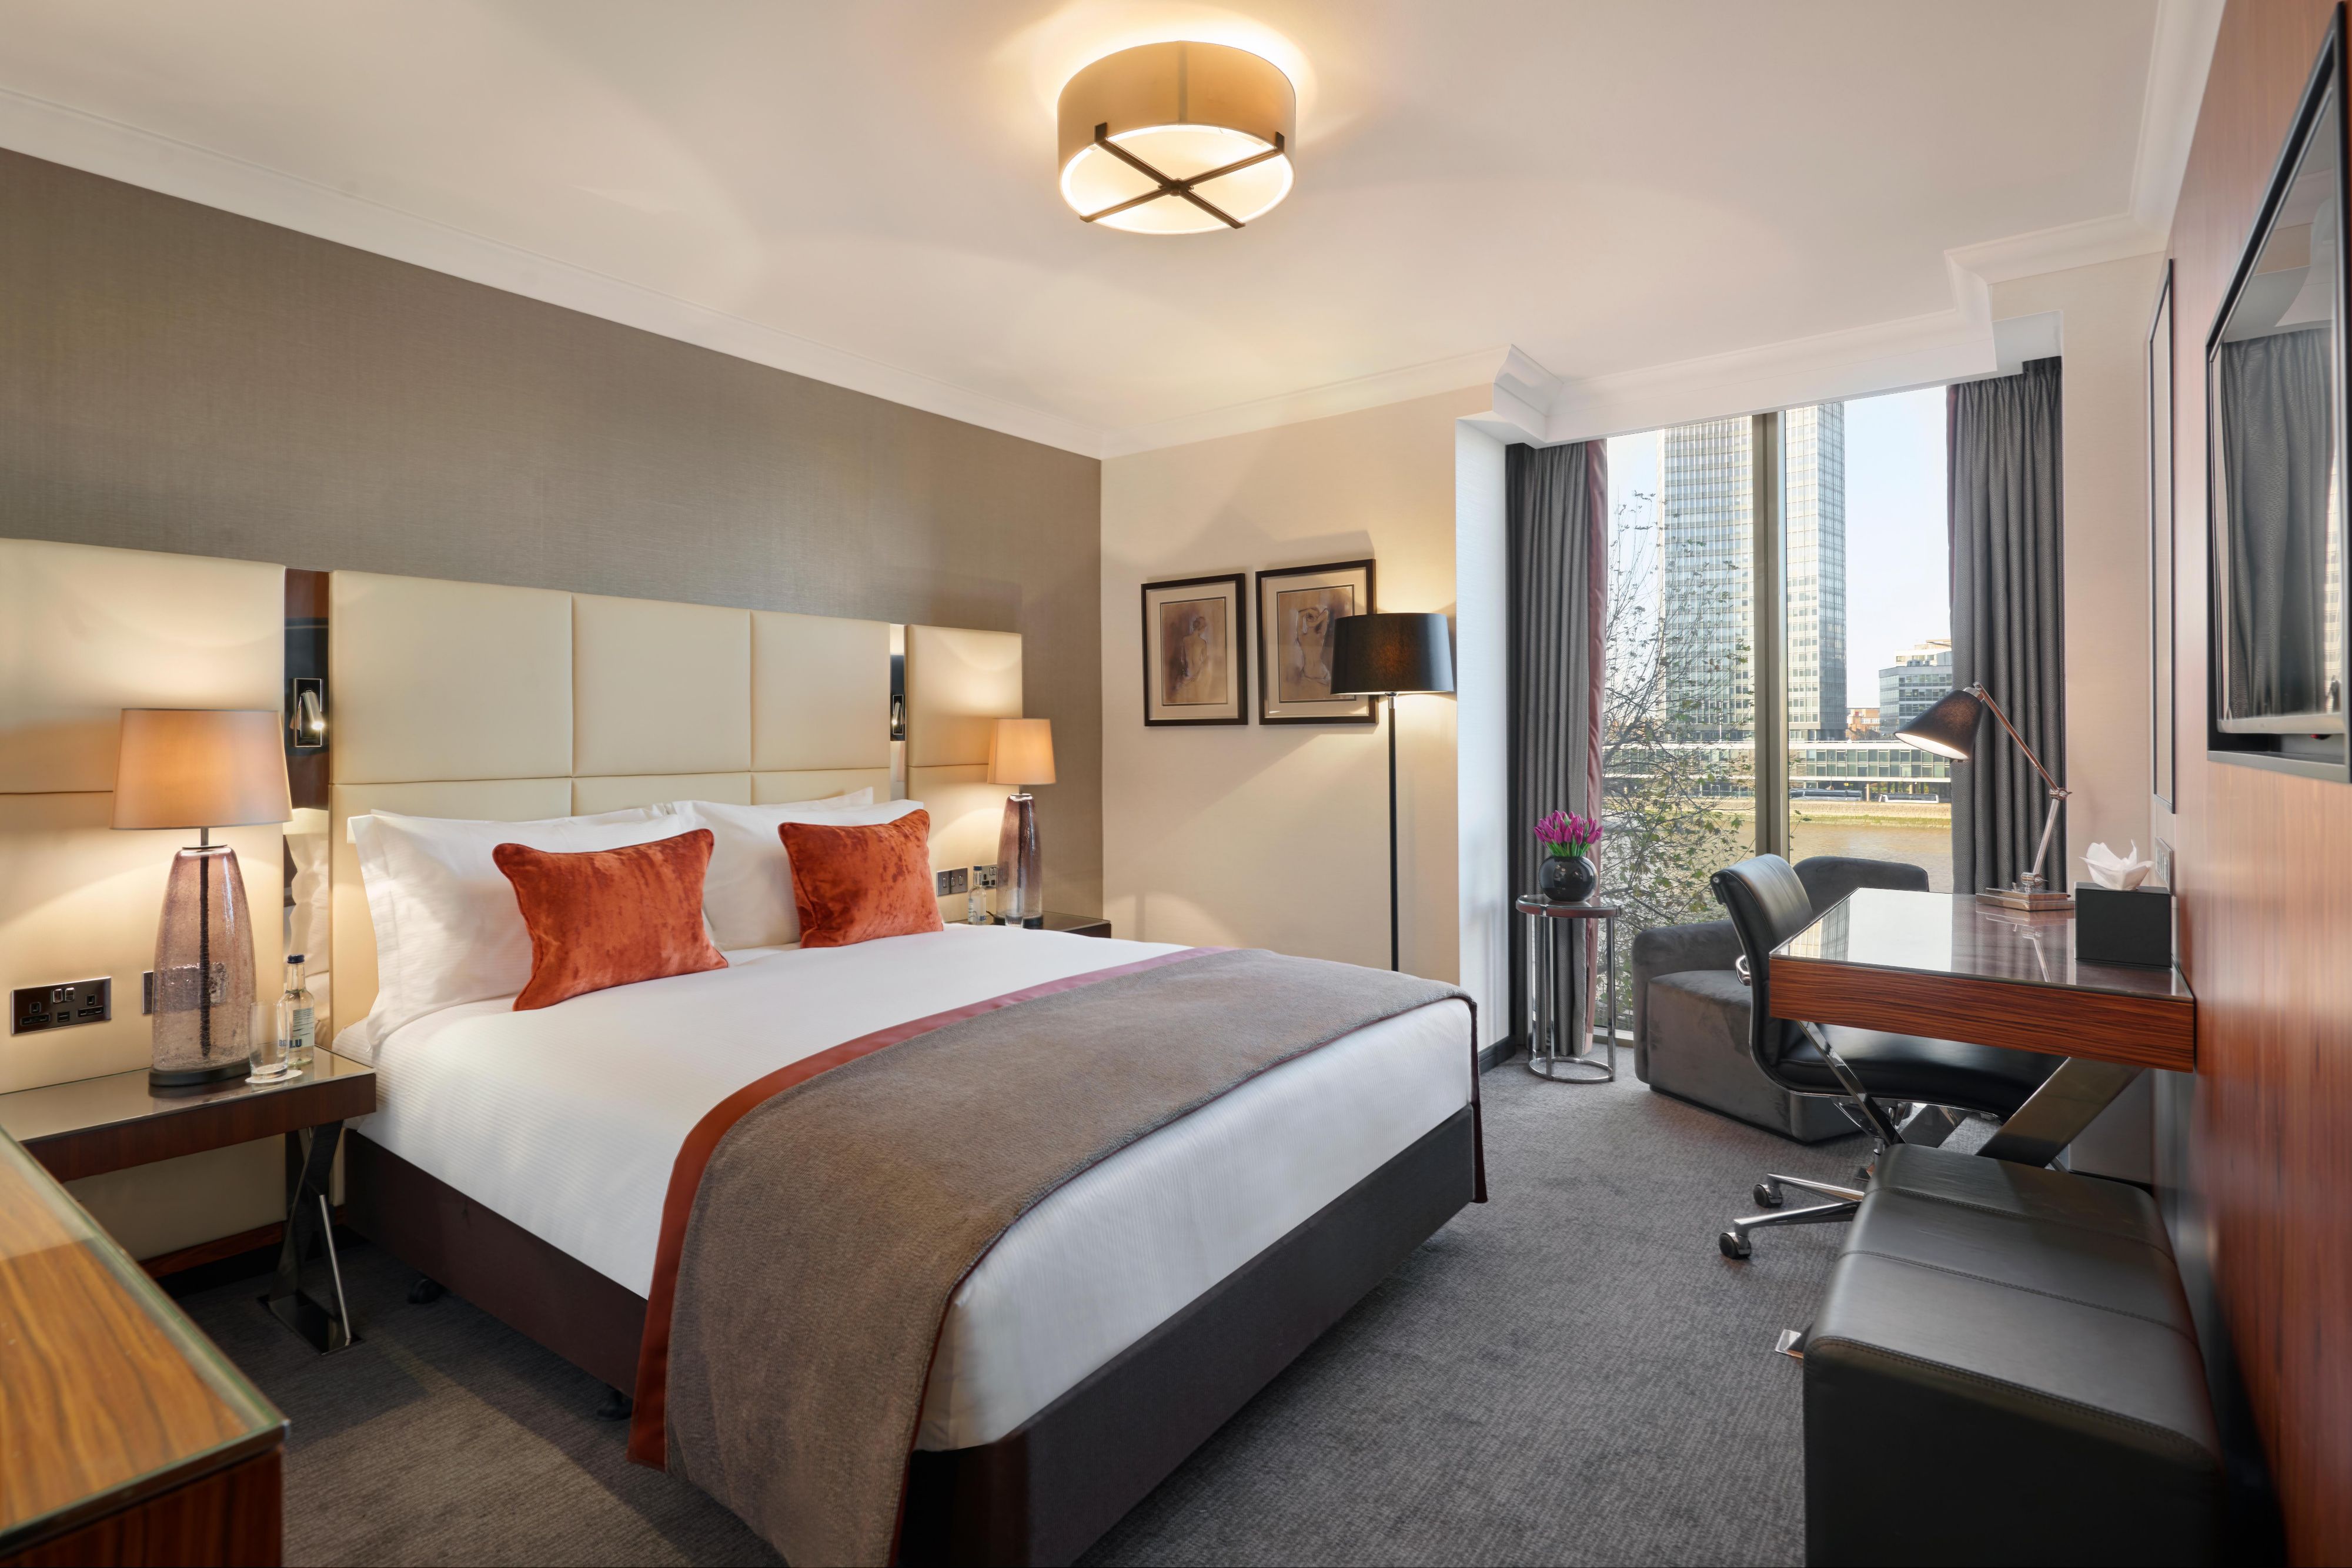 Guest King Room with view of the River Thames